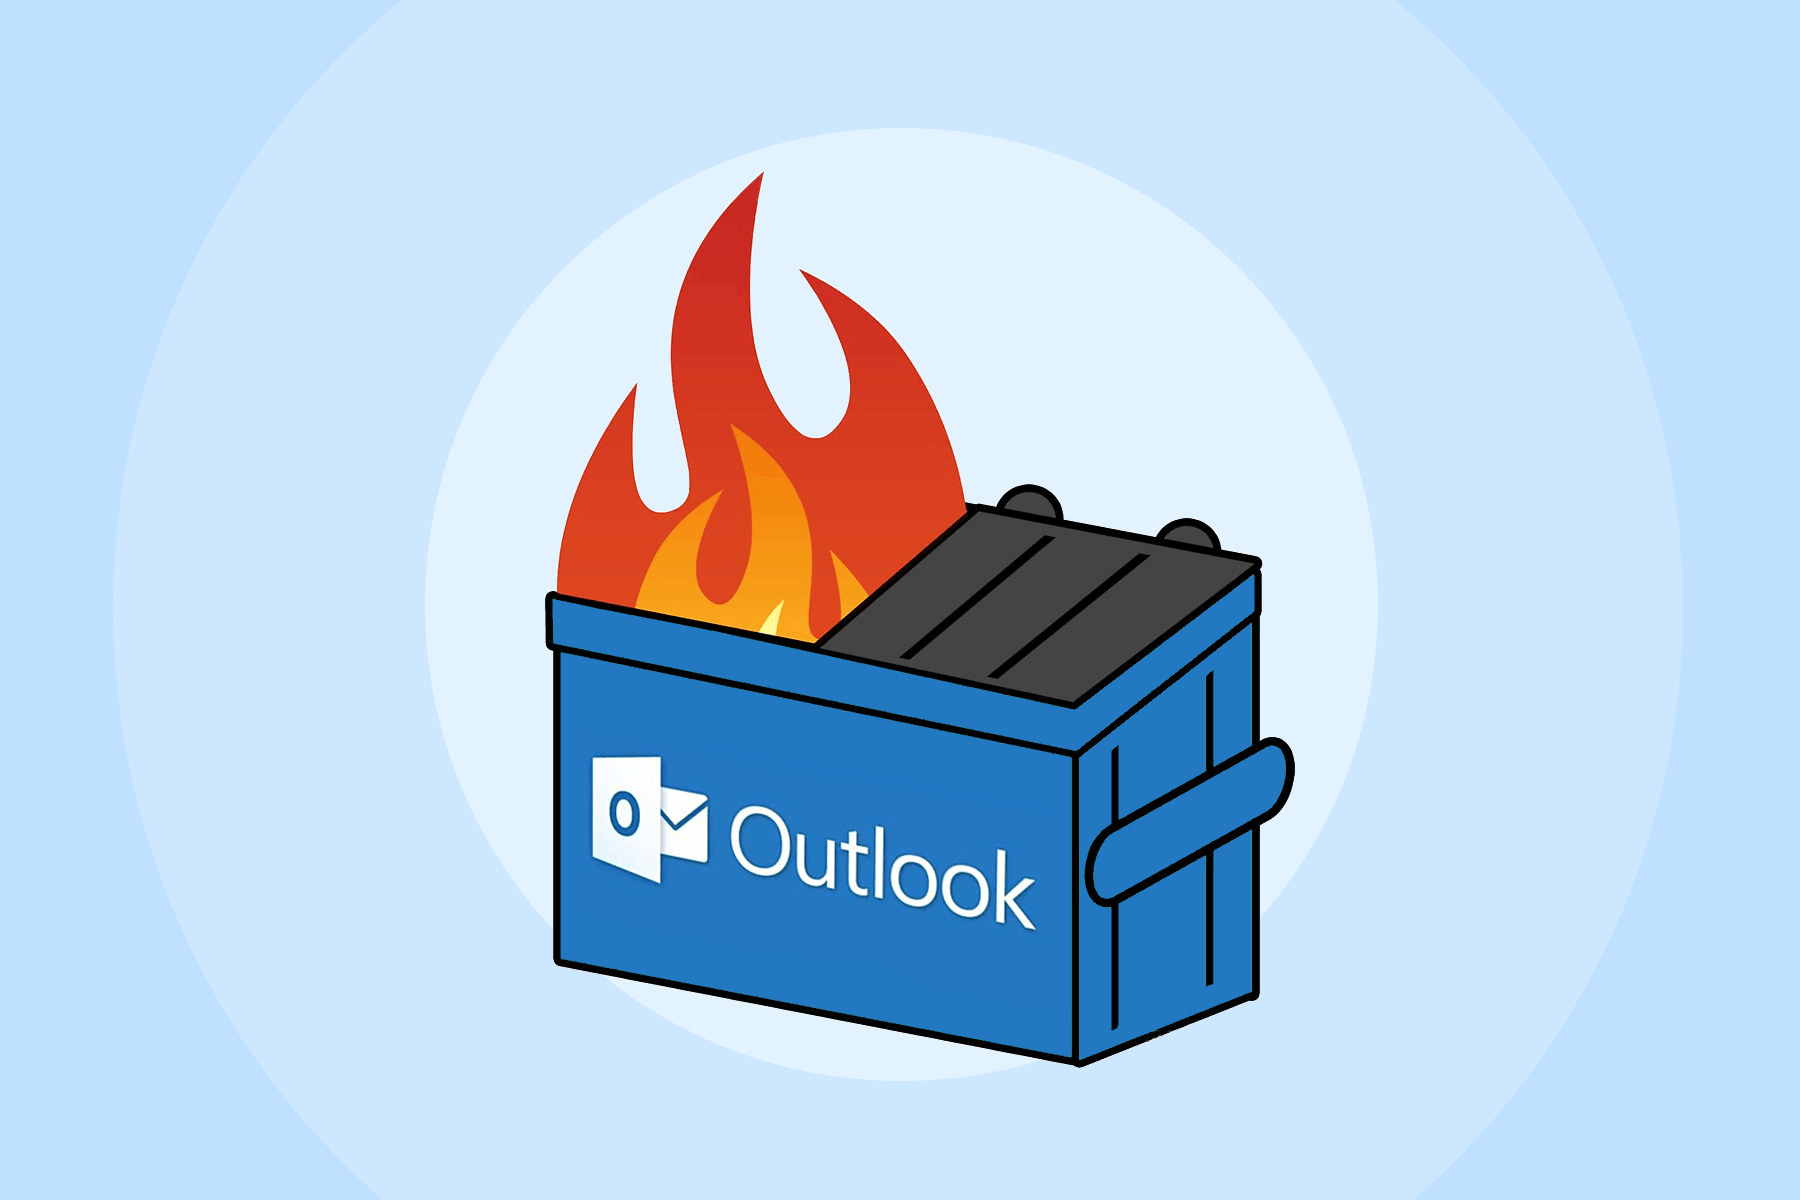 Dealing with Outlook